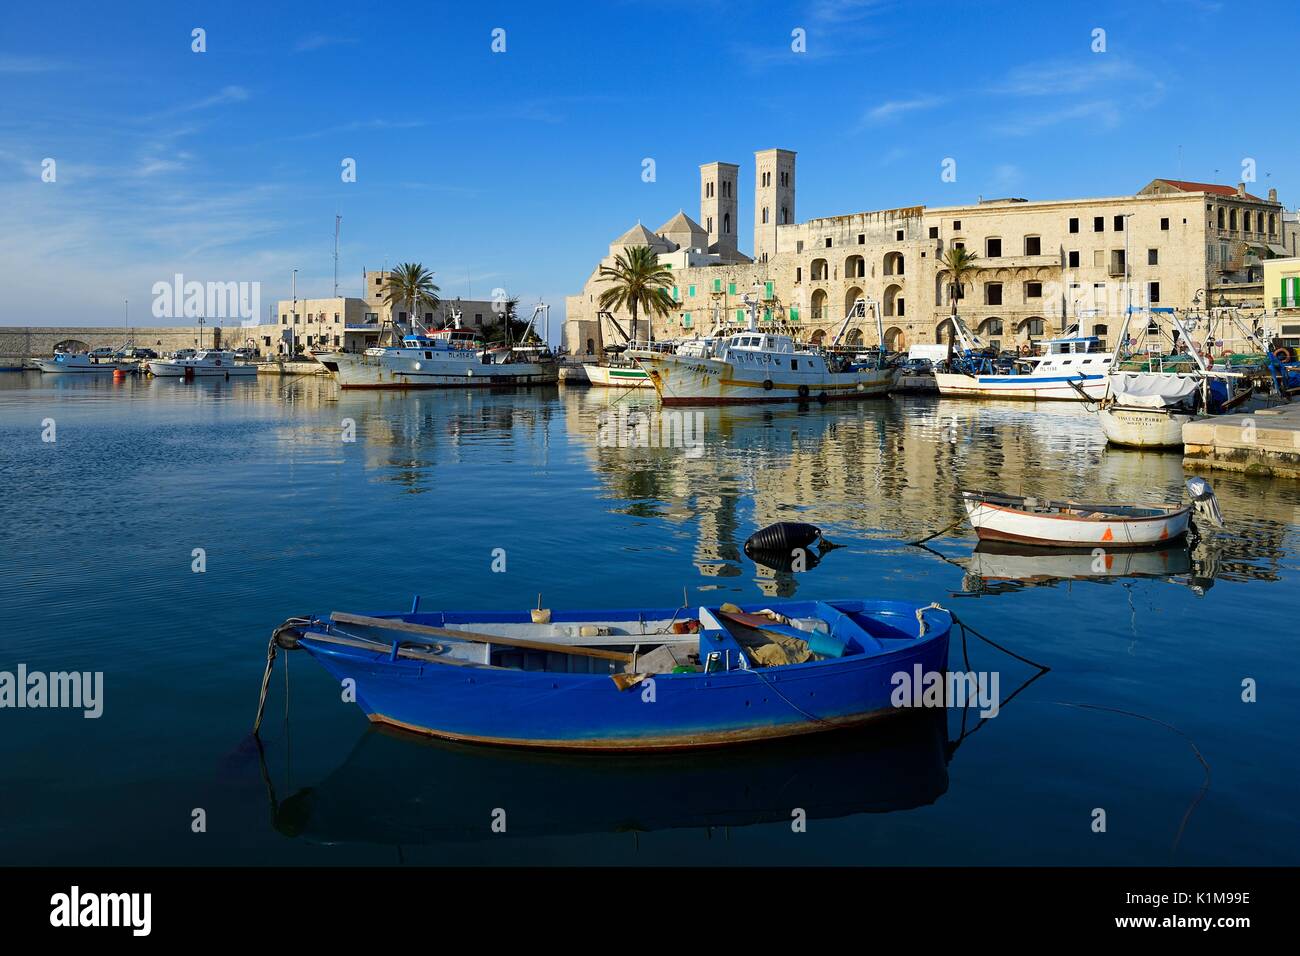 Harbour with old fishing boats, at back cathedral, San Corrado, Molfetta, province of Bari, Apulia, Italy Stock Photo